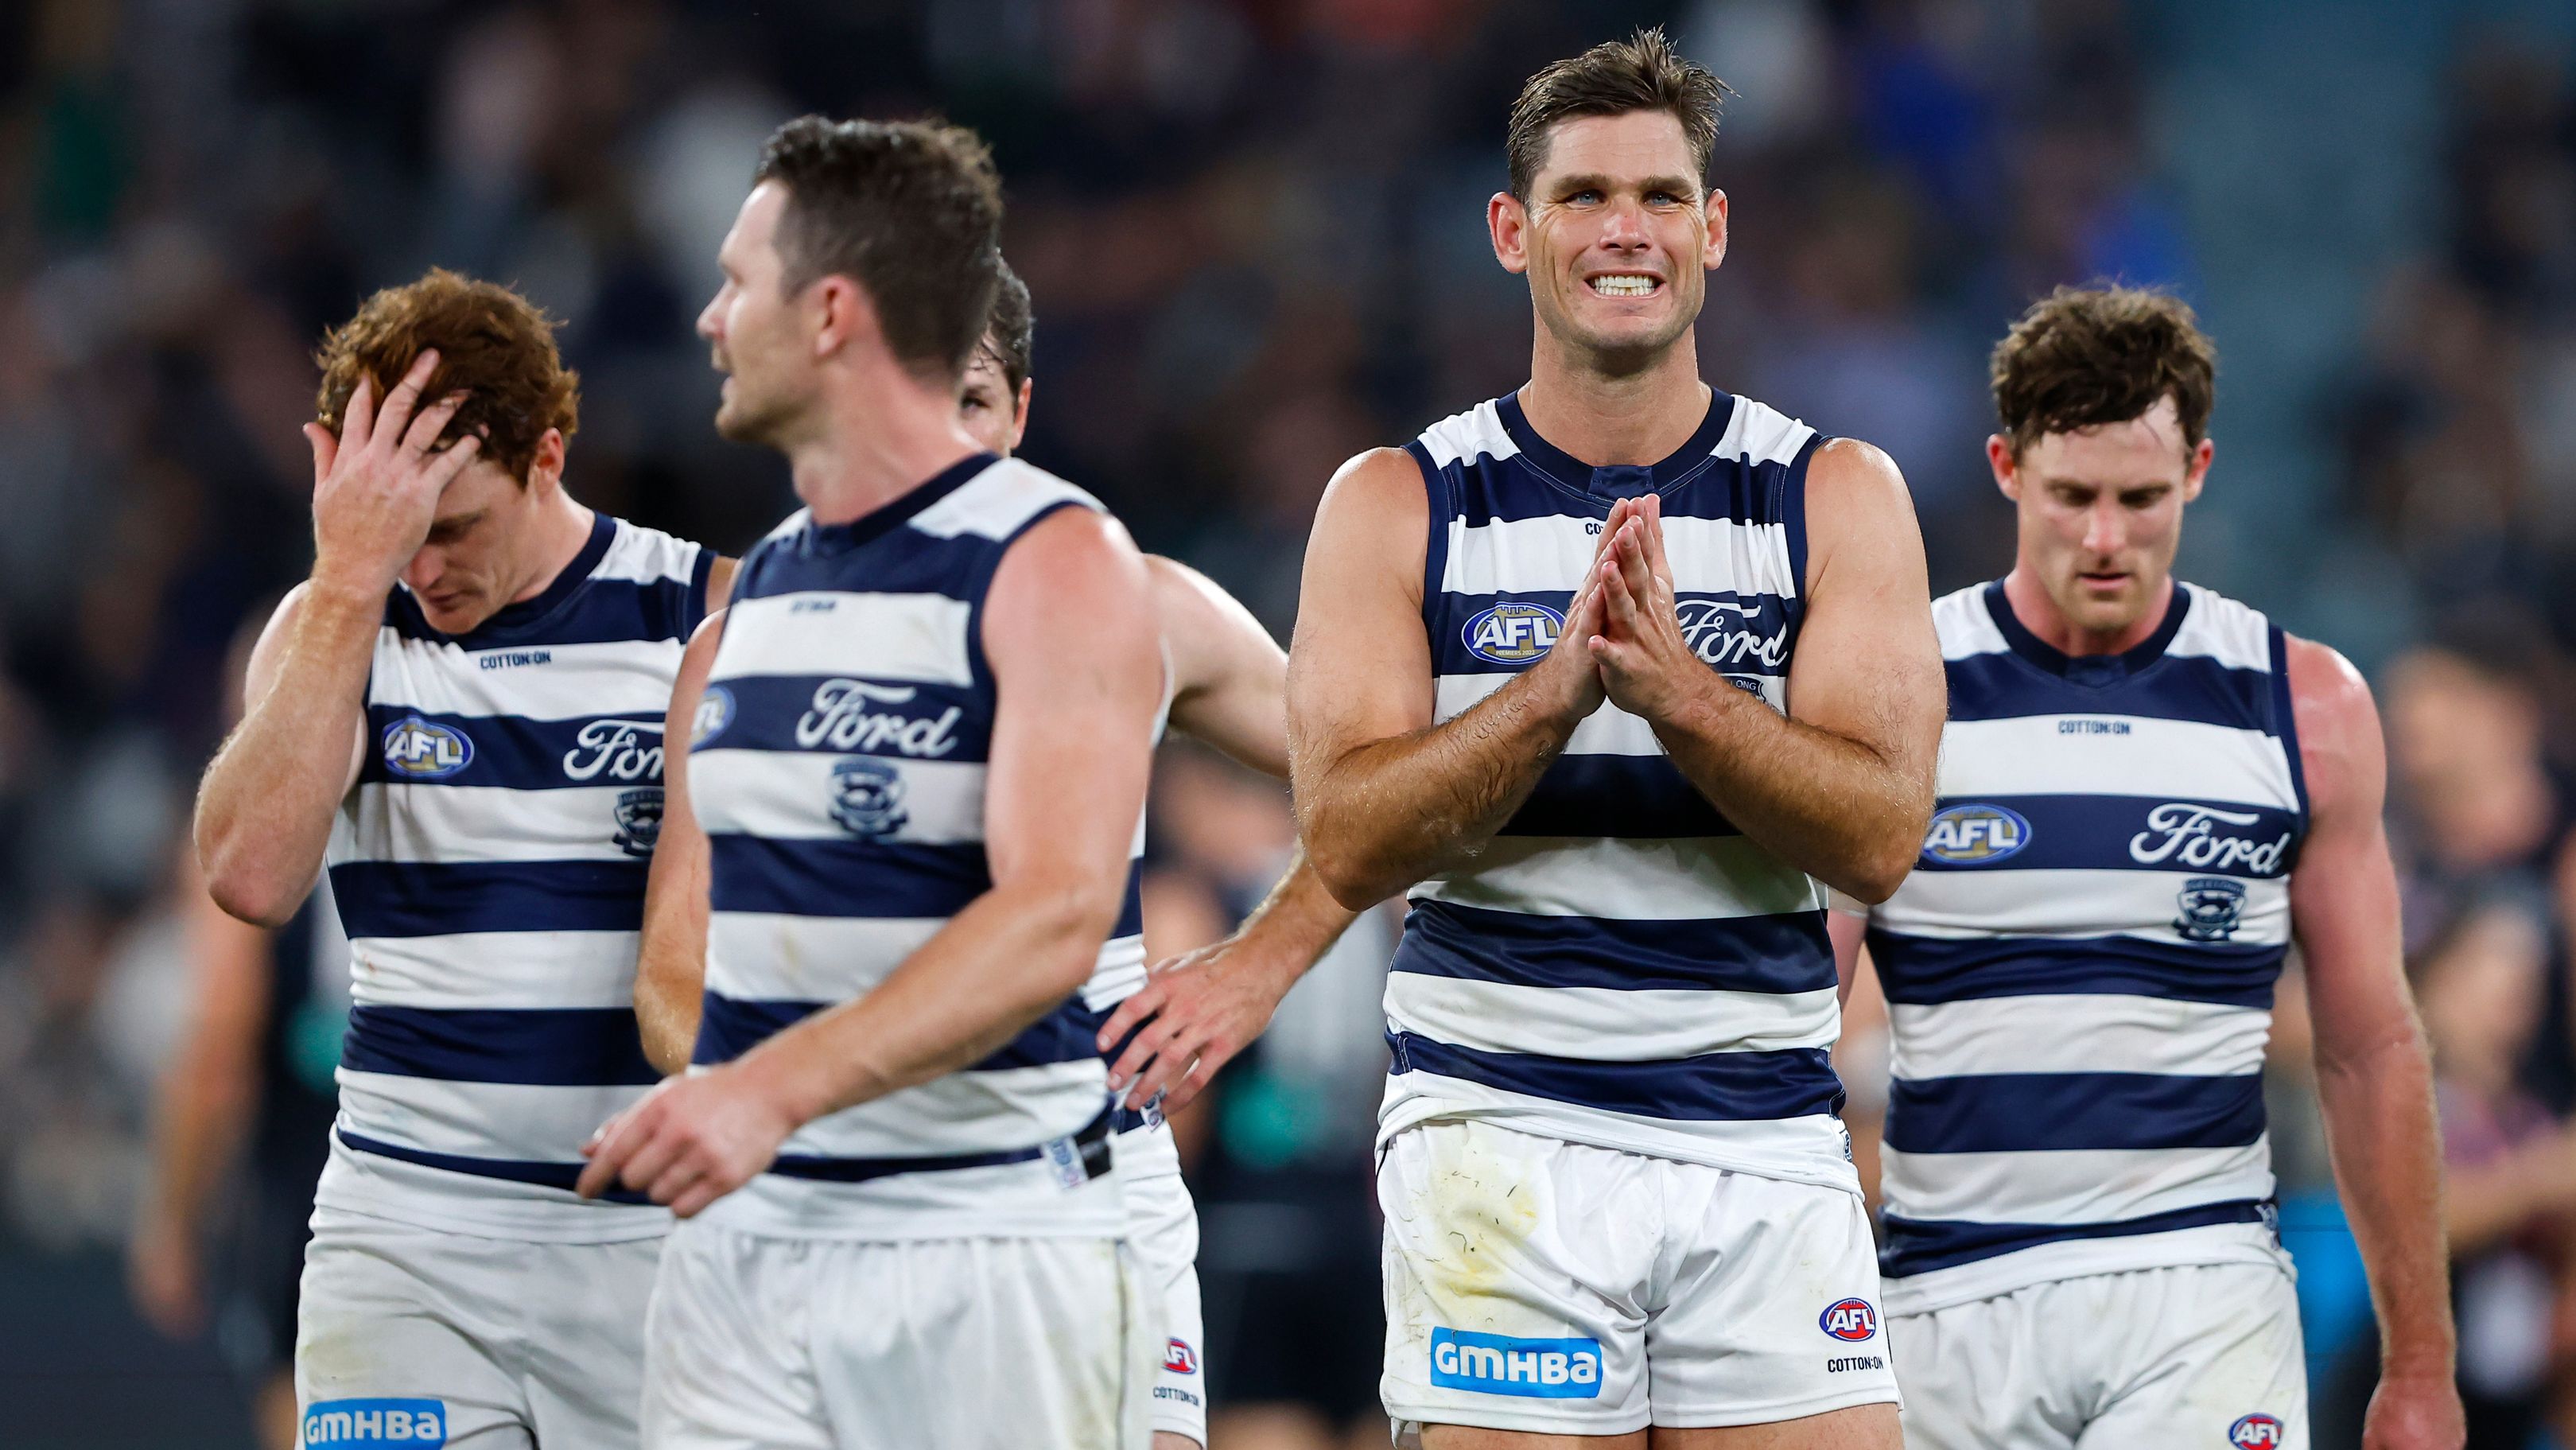 MELBOURNE, AUSTRALIA - MARCH 23: Tom Hawkins of the Cats looks dejected after a loss during the 2023 AFL Round 02 match between the Carlton Blues and the Geelong Cats at the Melbourne Cricket Ground on March 23, 2023 in Melbourne, Australia. (Photo by Dylan Burns/AFL Photos)